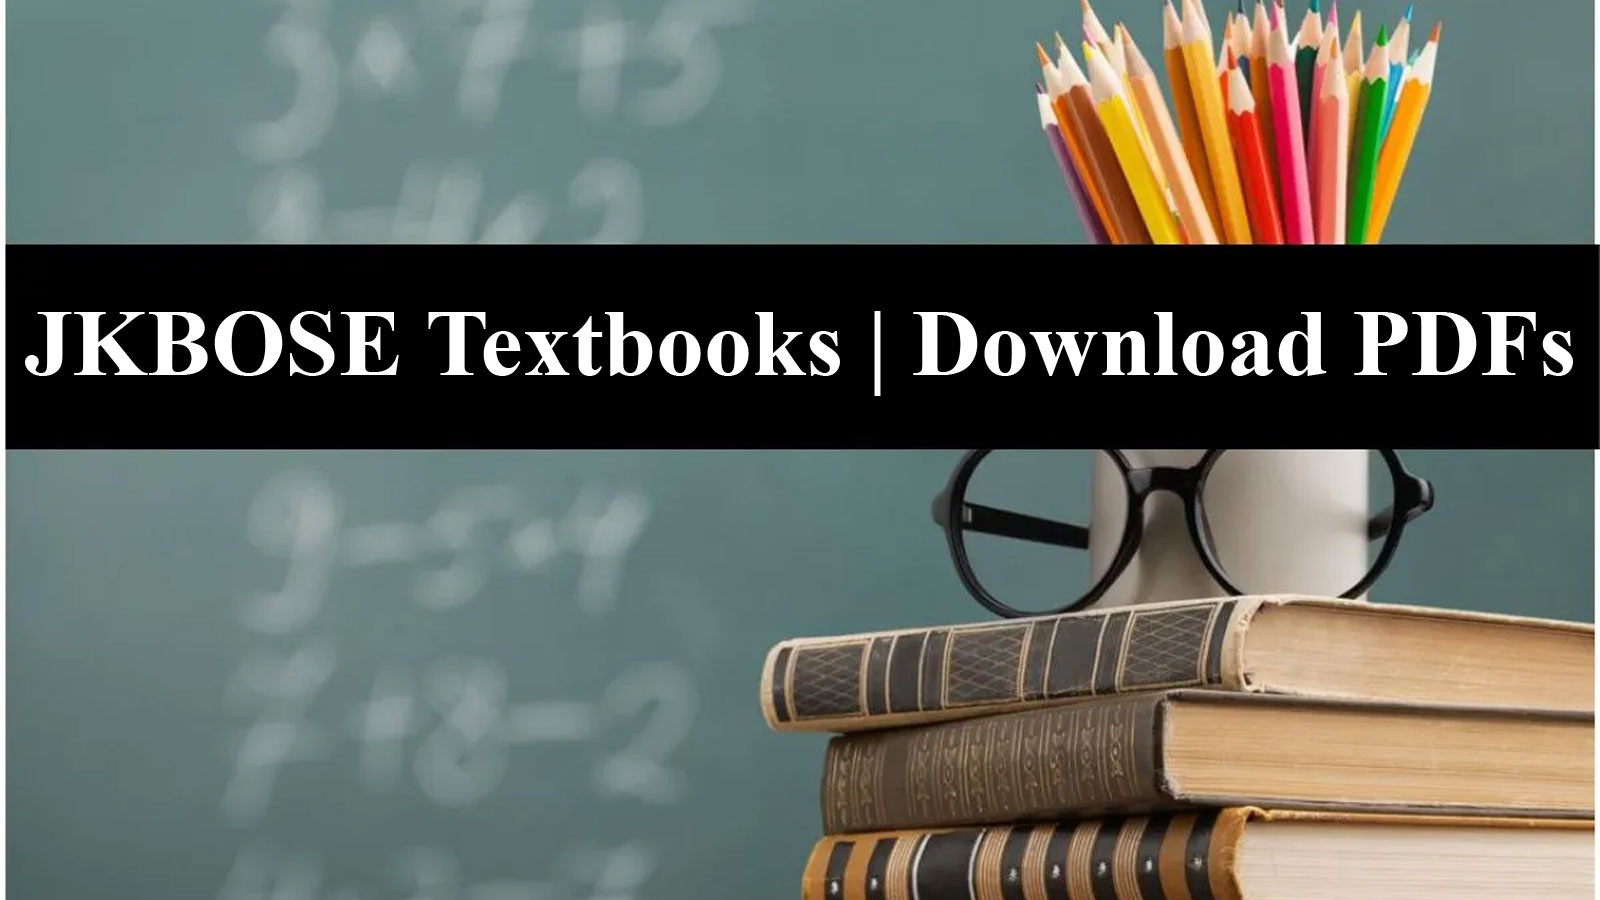 JKBOSE Class 10th Textbooks; Direct Link to Download PDFs